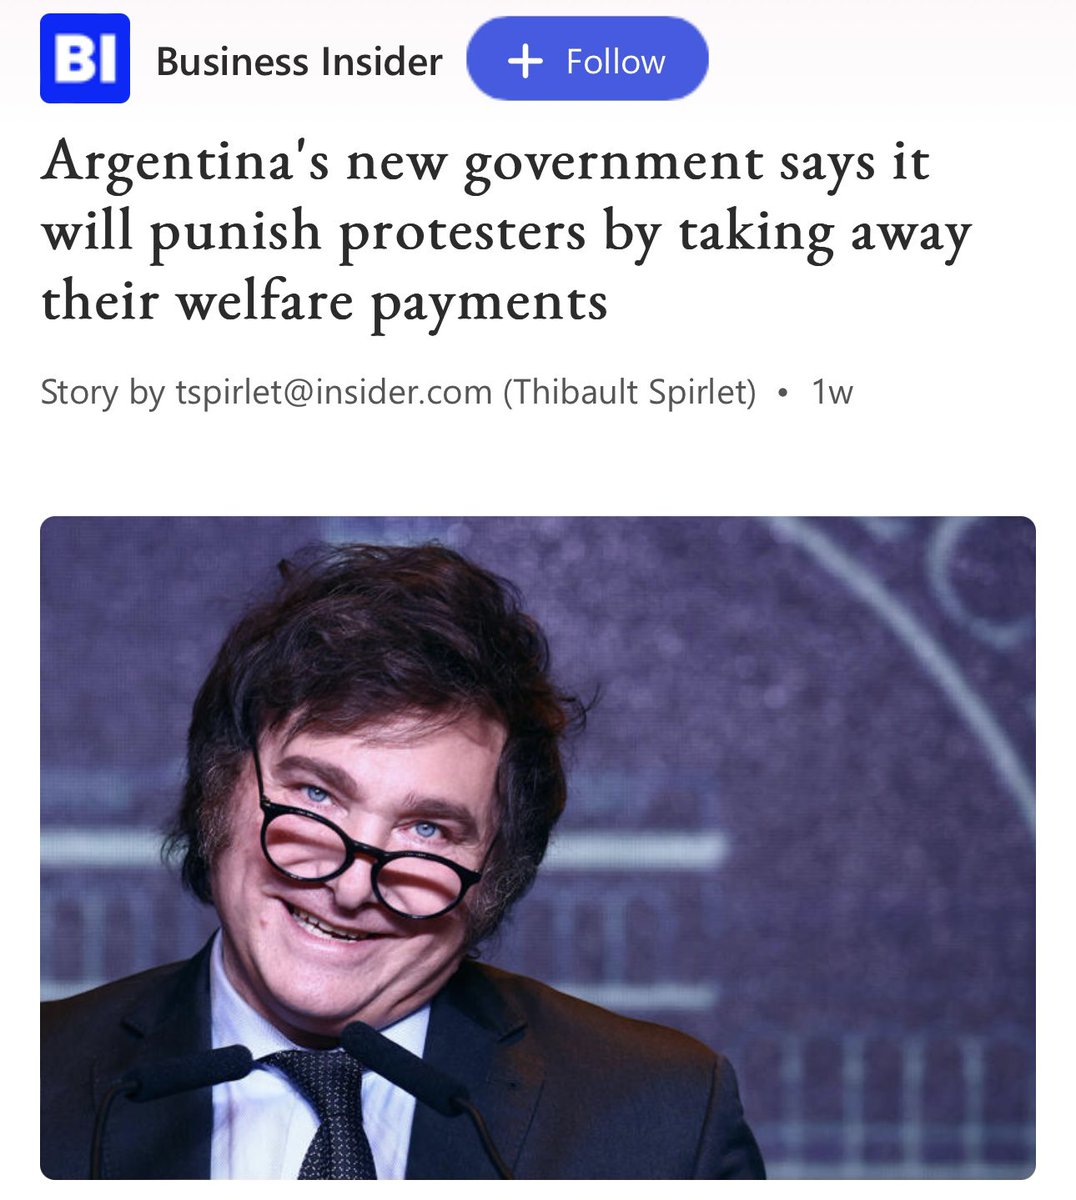 Javier Milei said he will cut welfare payments from protesters who block streets.

If we did this in America, the climate cultists would stop glueing themselves to roads and there would be no more anti-Israel protestors blocking streets, bridges, and airports.

These extremists